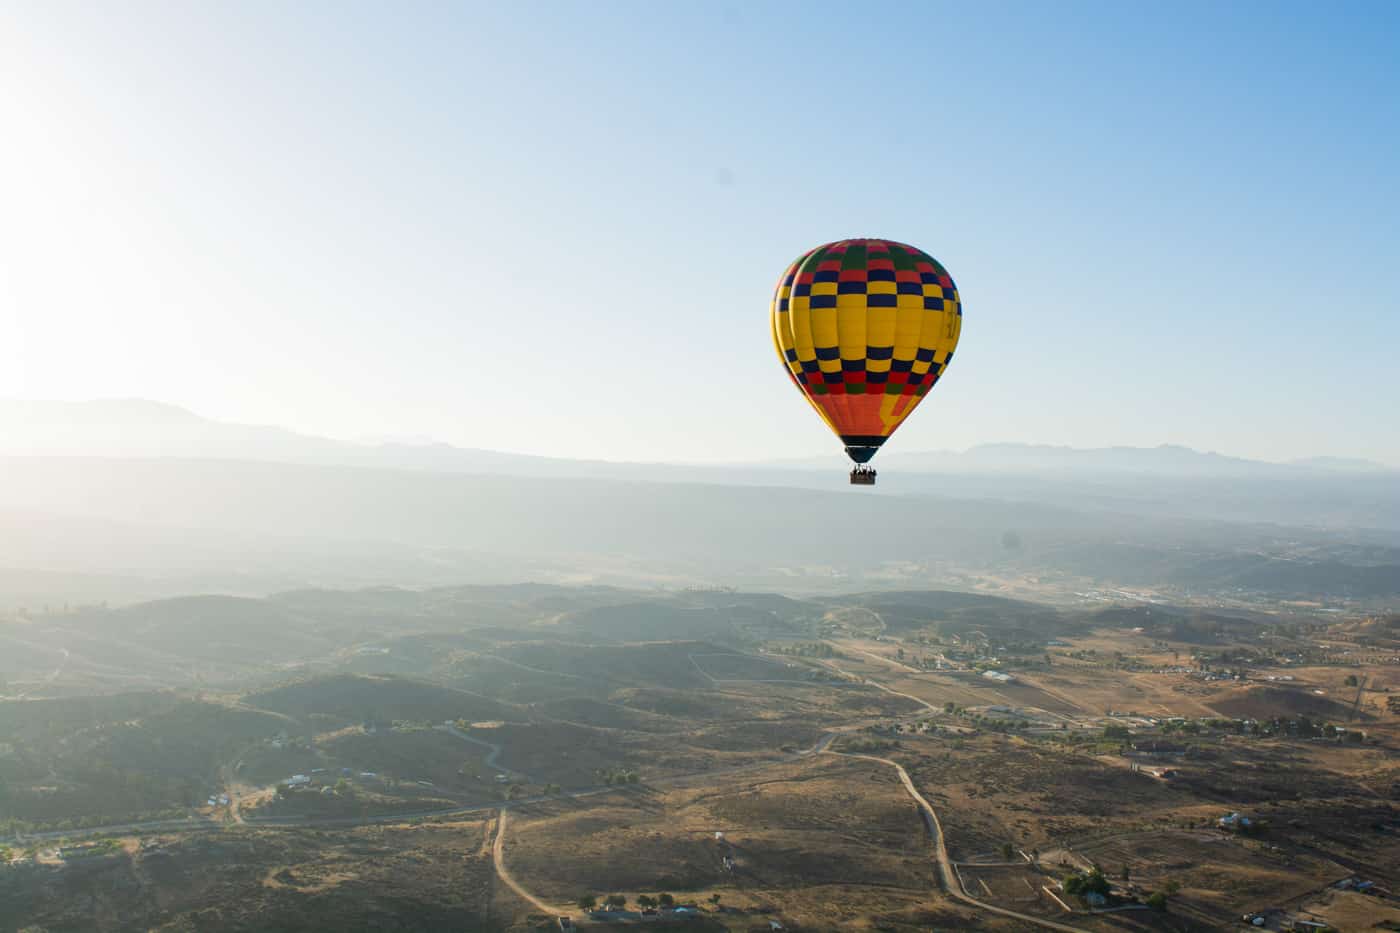 How to Plan a Day Trip to Temecula